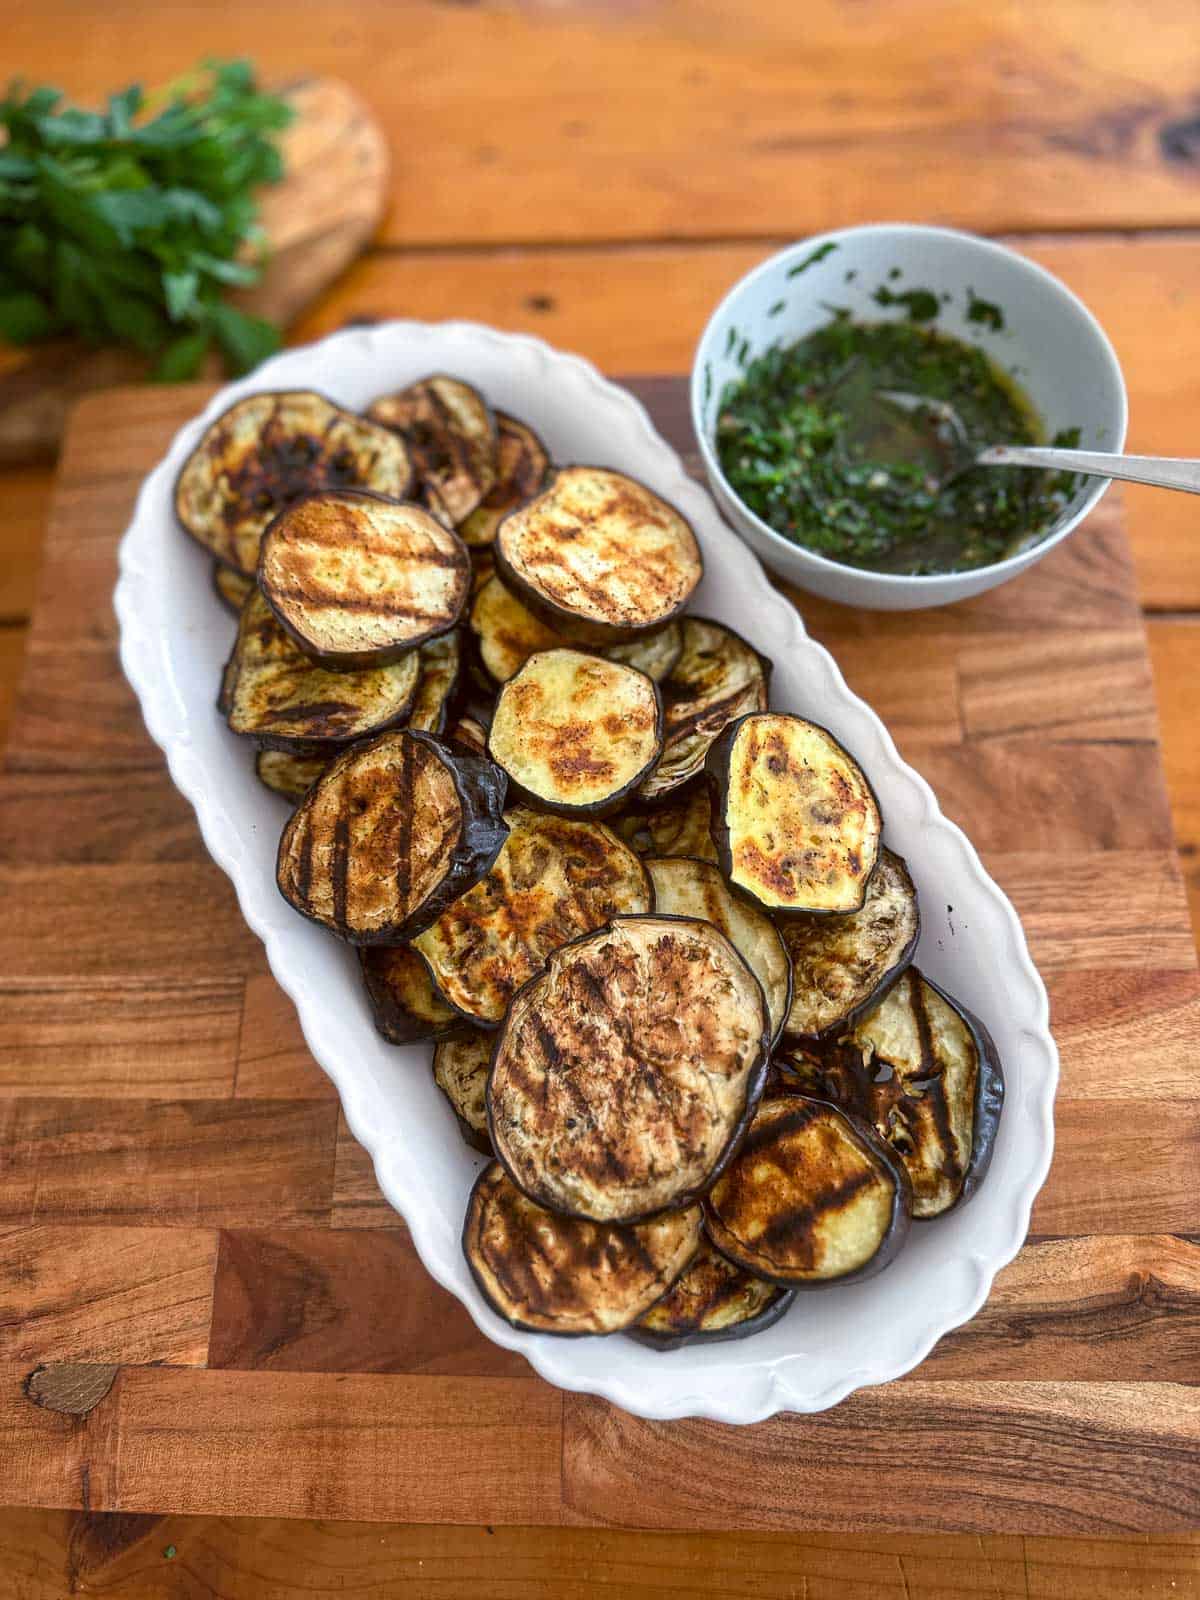 Grilled eggplant slices on a white tray with the parsley sauce next to it. sauce hasn't been poured on top yet so you see the grill marks on the eggplant clearly.